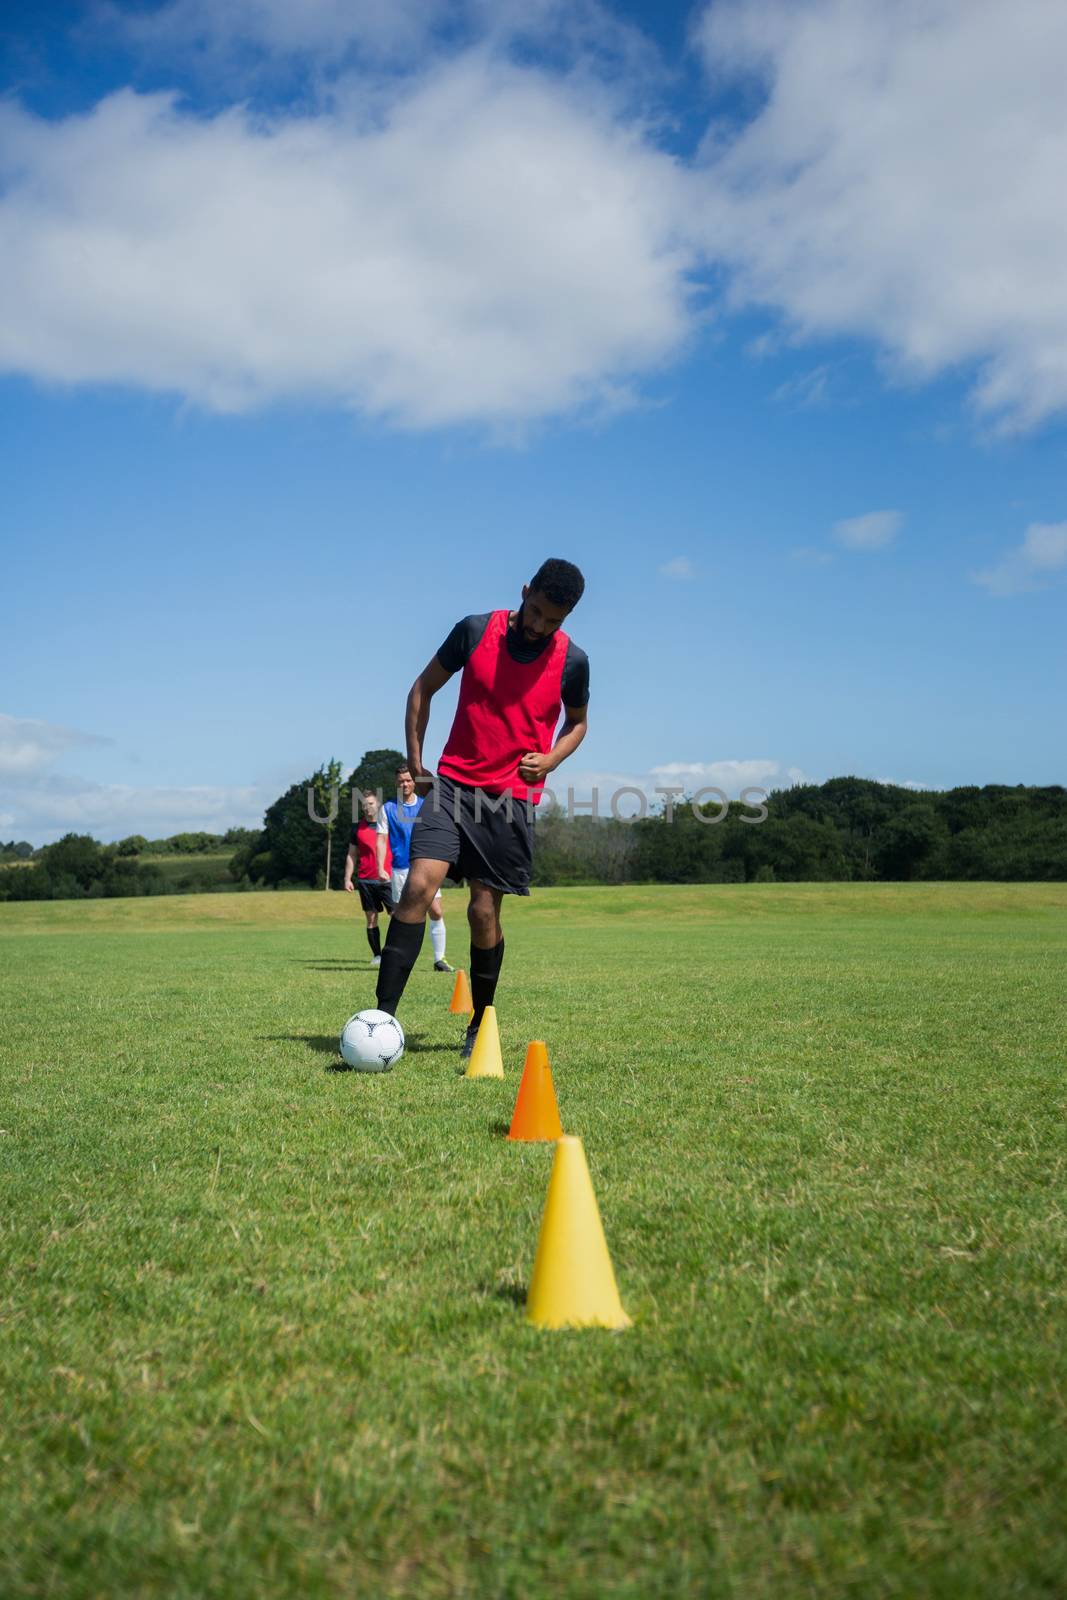 Soccer player dribbling through cones in the ground on a sunny day